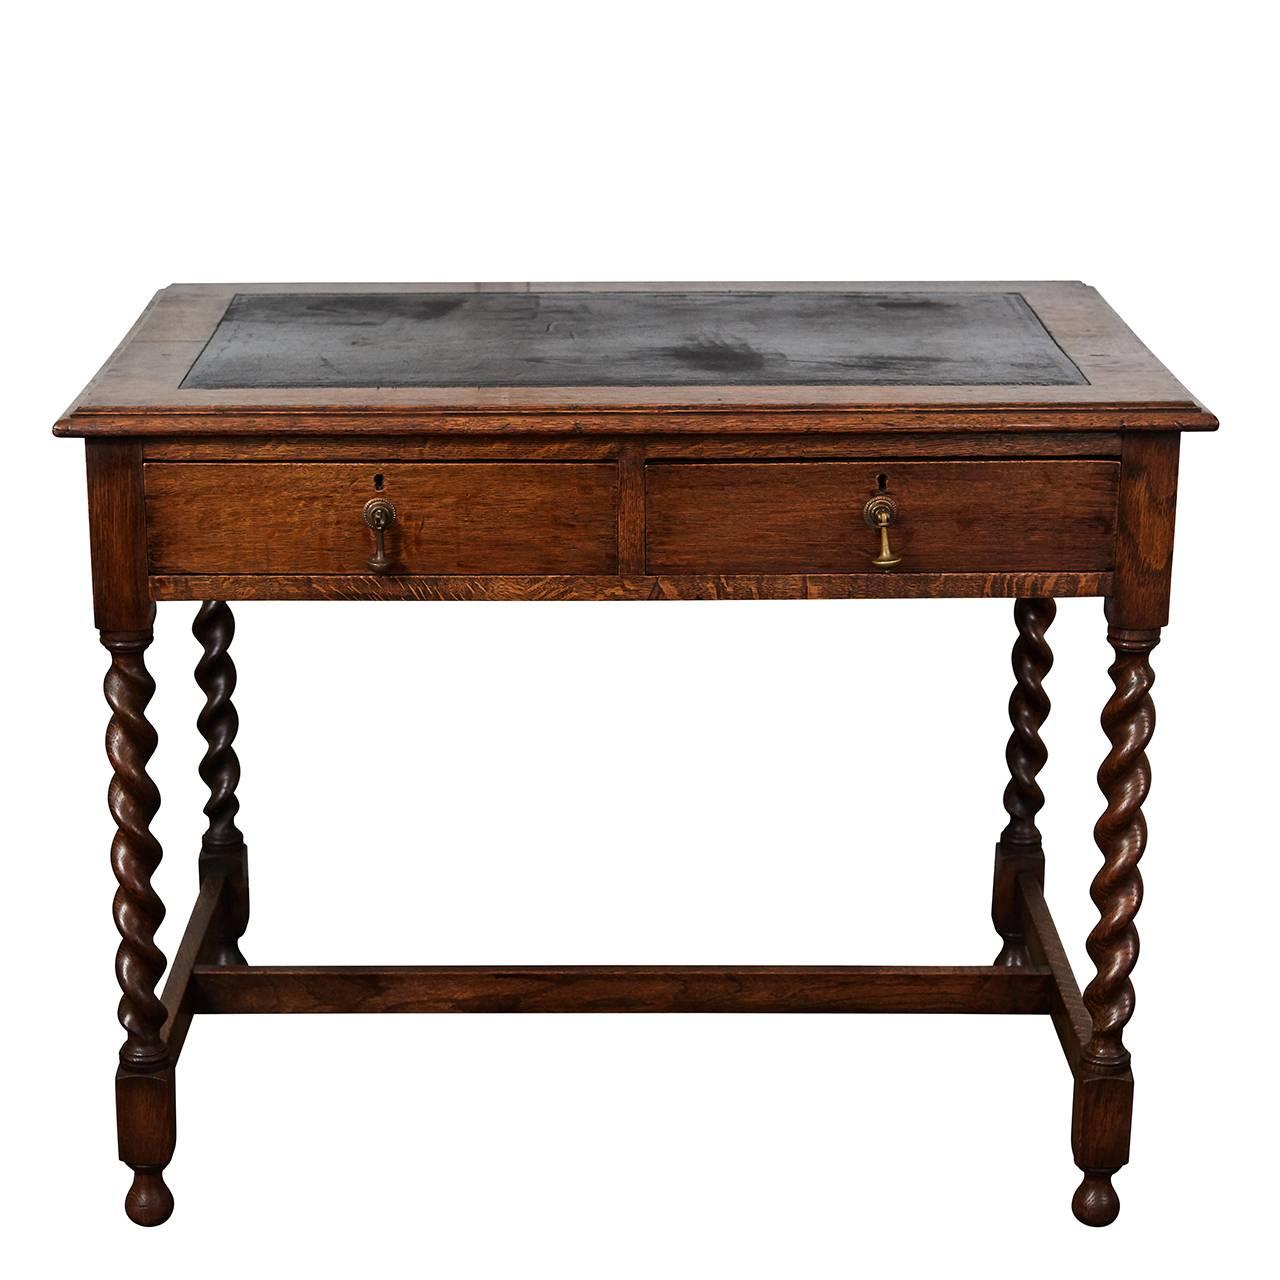 This writing table has the original black leather top, elegant barley twist legs, ball feet and nicely shaped hand-carved stretchers. The desk has two drawers with brass drop pull handles of an interesting design.